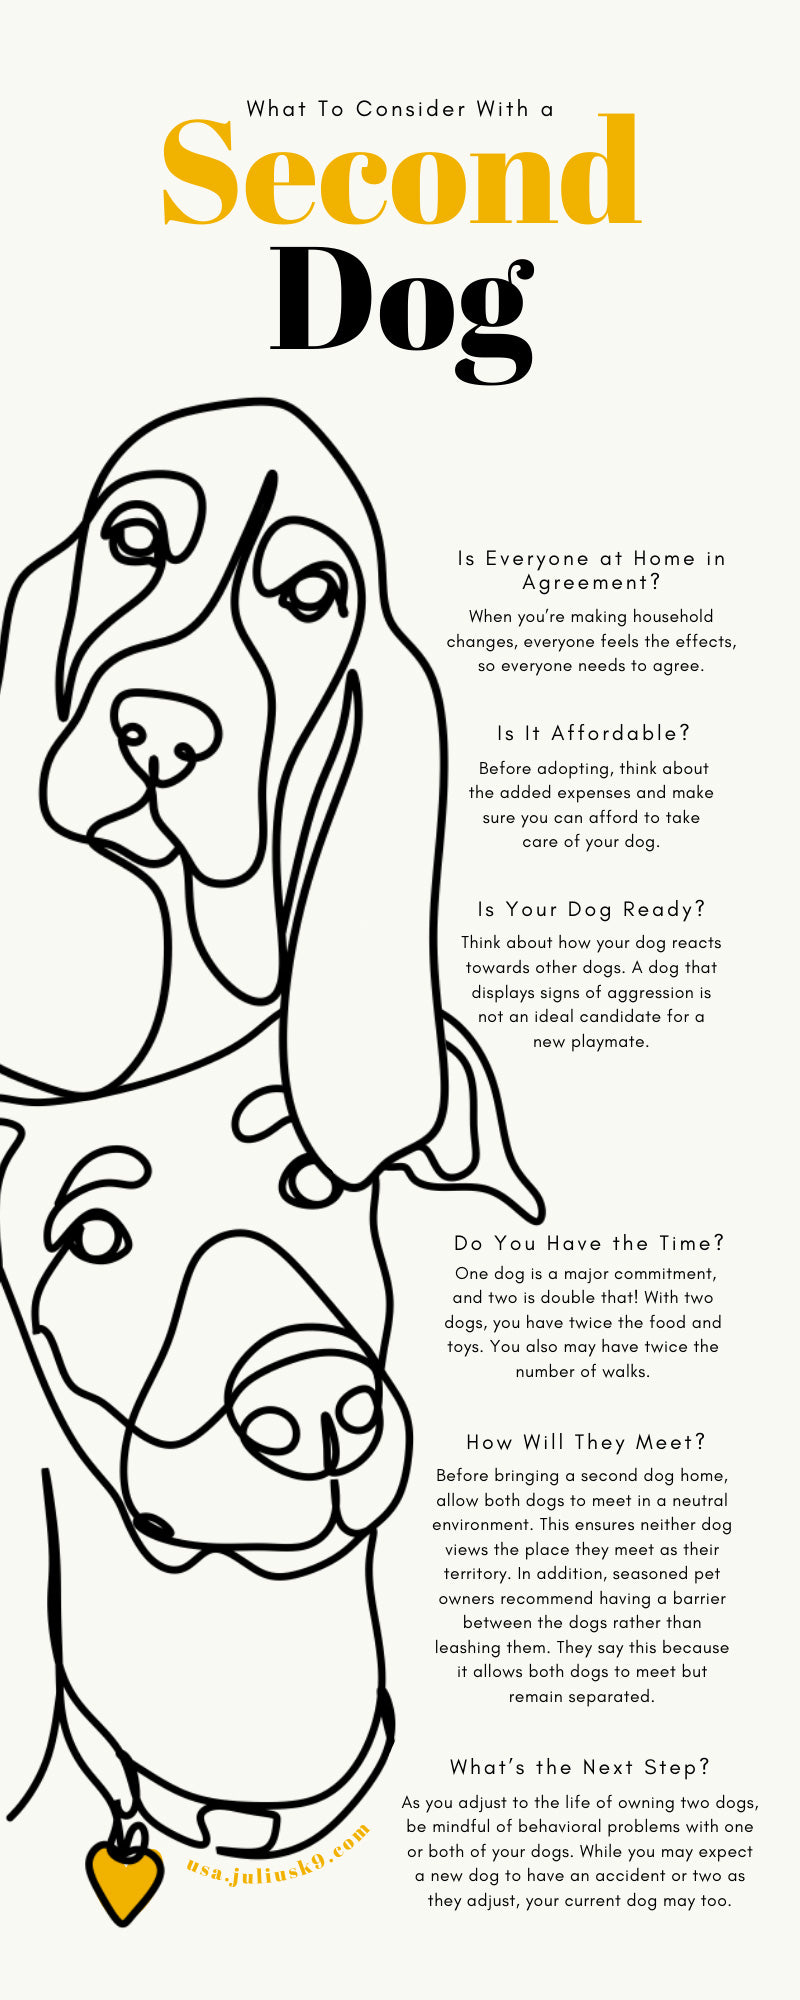 What To Consider With a Second Dog